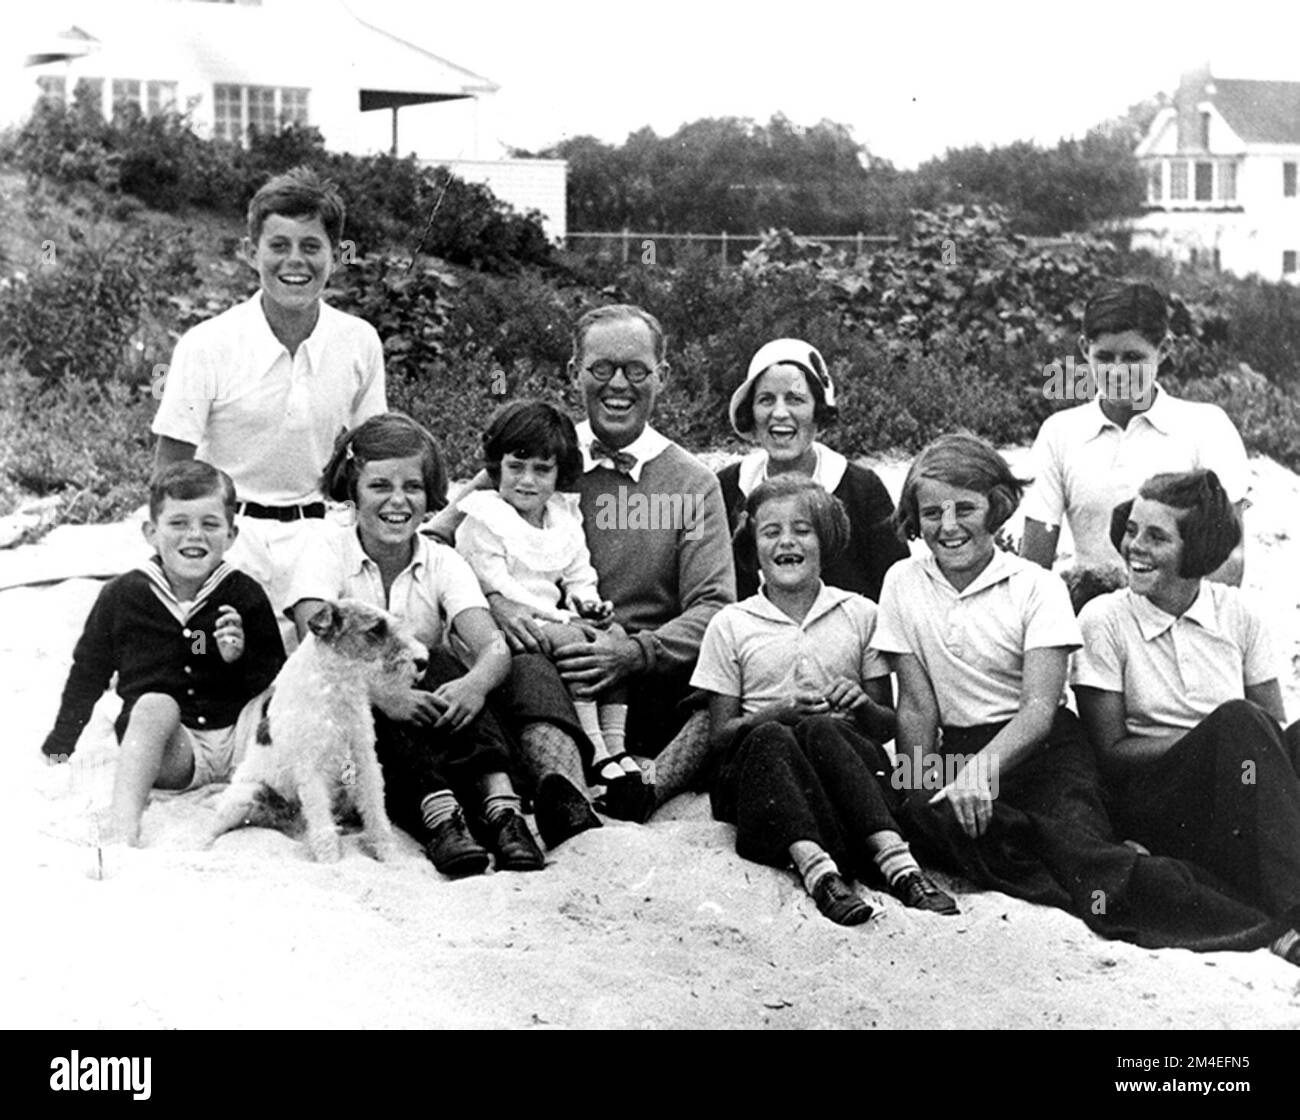 PC 8  The Kennedy Family at Hyannis Port, 1931. L-R: Robert Kennedy, John F. Kennedy, Eunice Kennedy, Jean Kennedy (on lap of) Joseph P. Kennedy Sr., Rose Fitzgerald Kennedy (behind) Patricia Kennedy, Kathleen Kennedy, Joseph P. Kennedy Jr. (behind) Rosemary Kennedy. Dog in foreground is 'Buddy'. John F Kennedy was 14 years old when this photo was taken Stock Photo